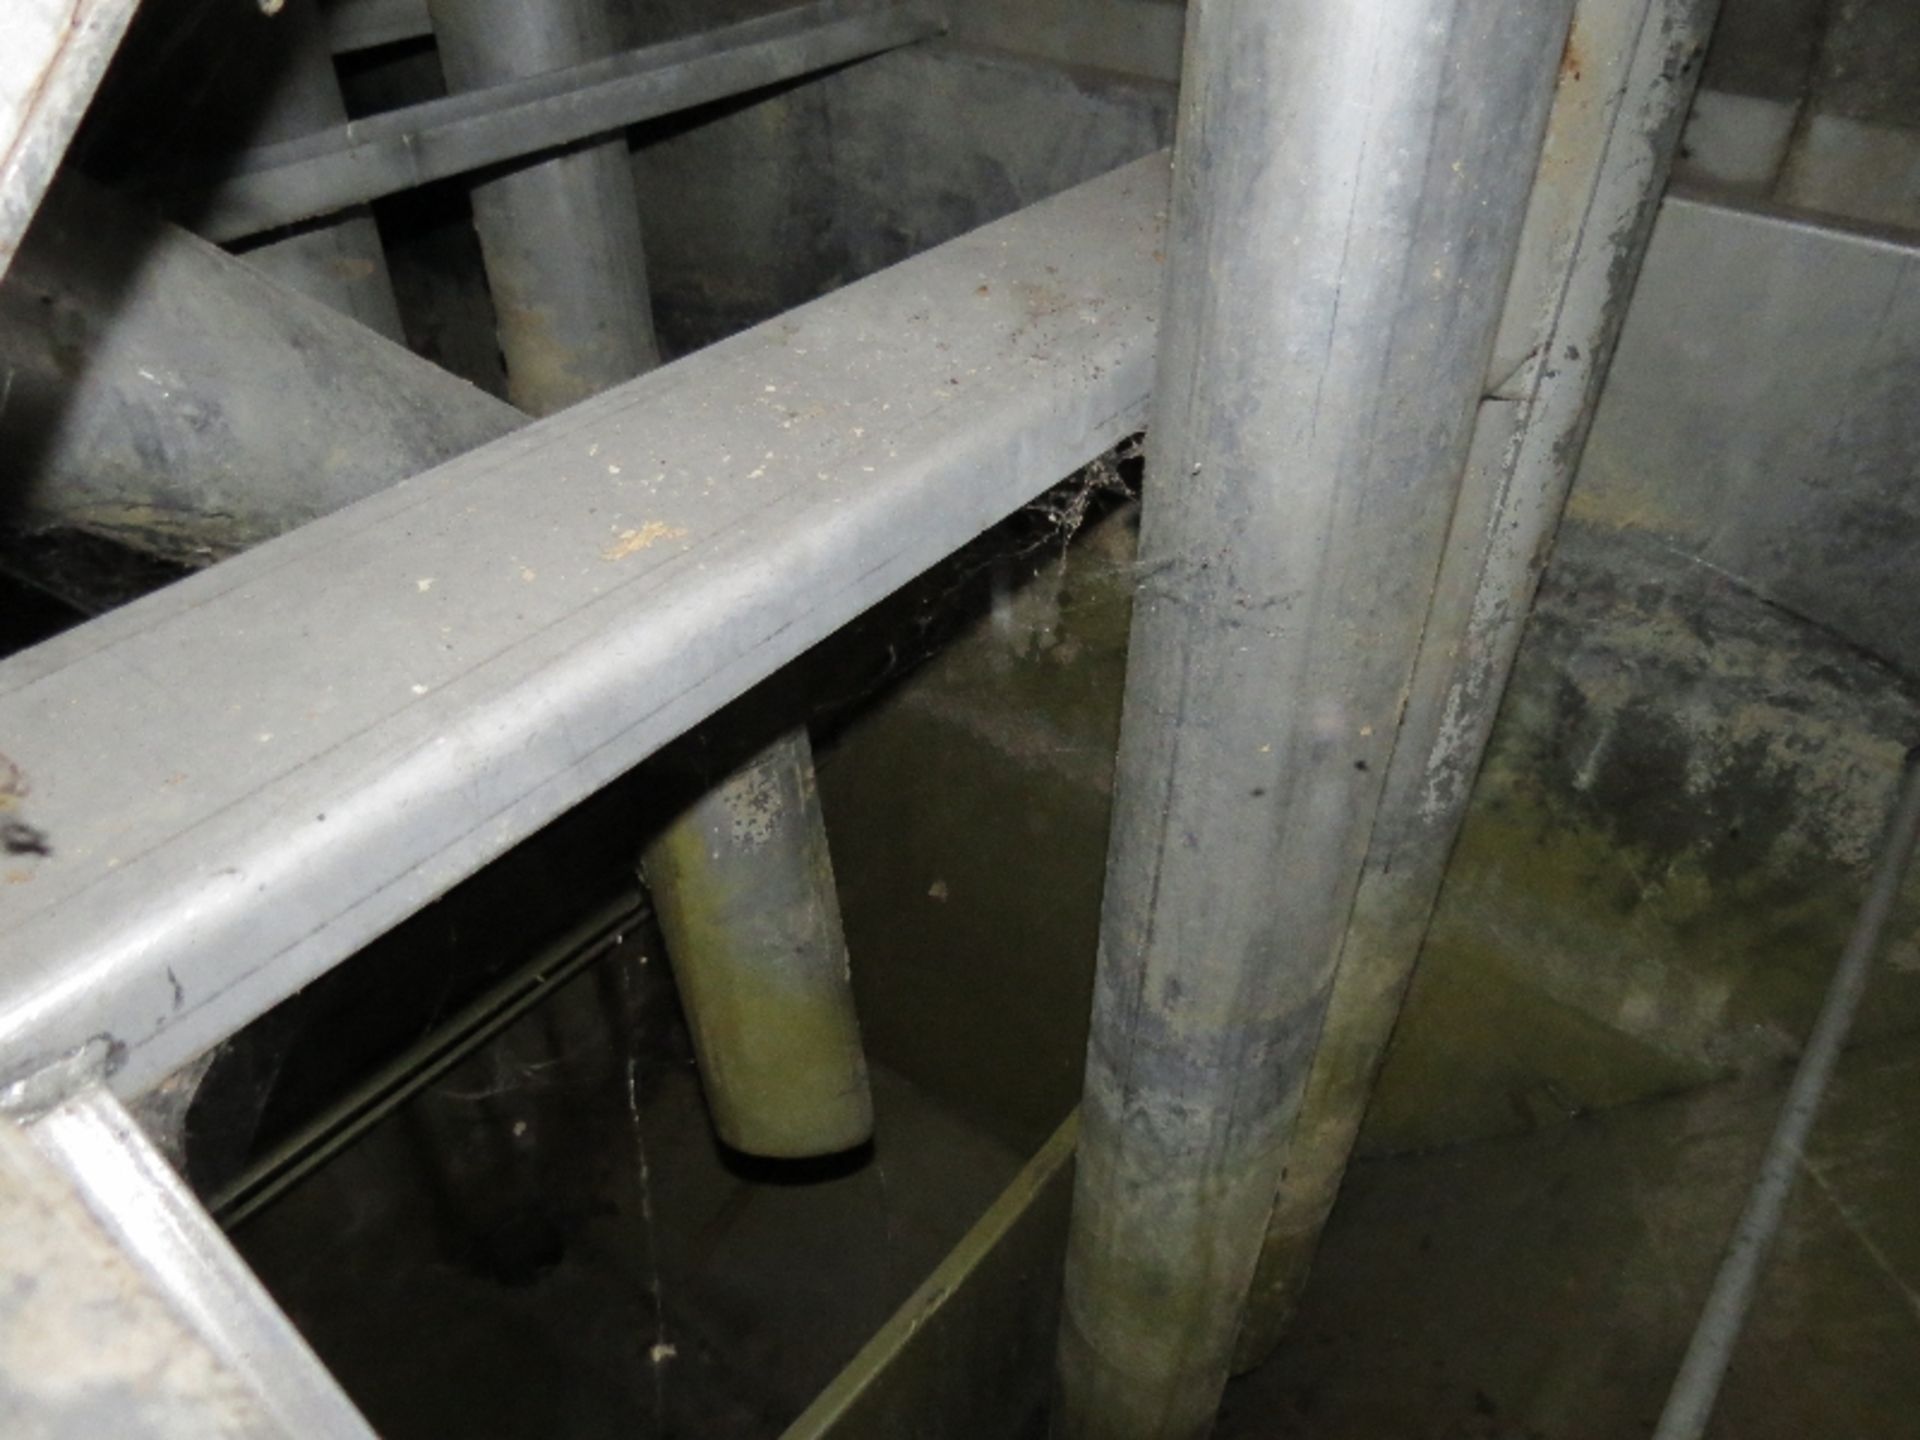 Fiber Washer system Stainless Steel Construction Trough with 7 Re-Circulation Pumps - Image 7 of 10